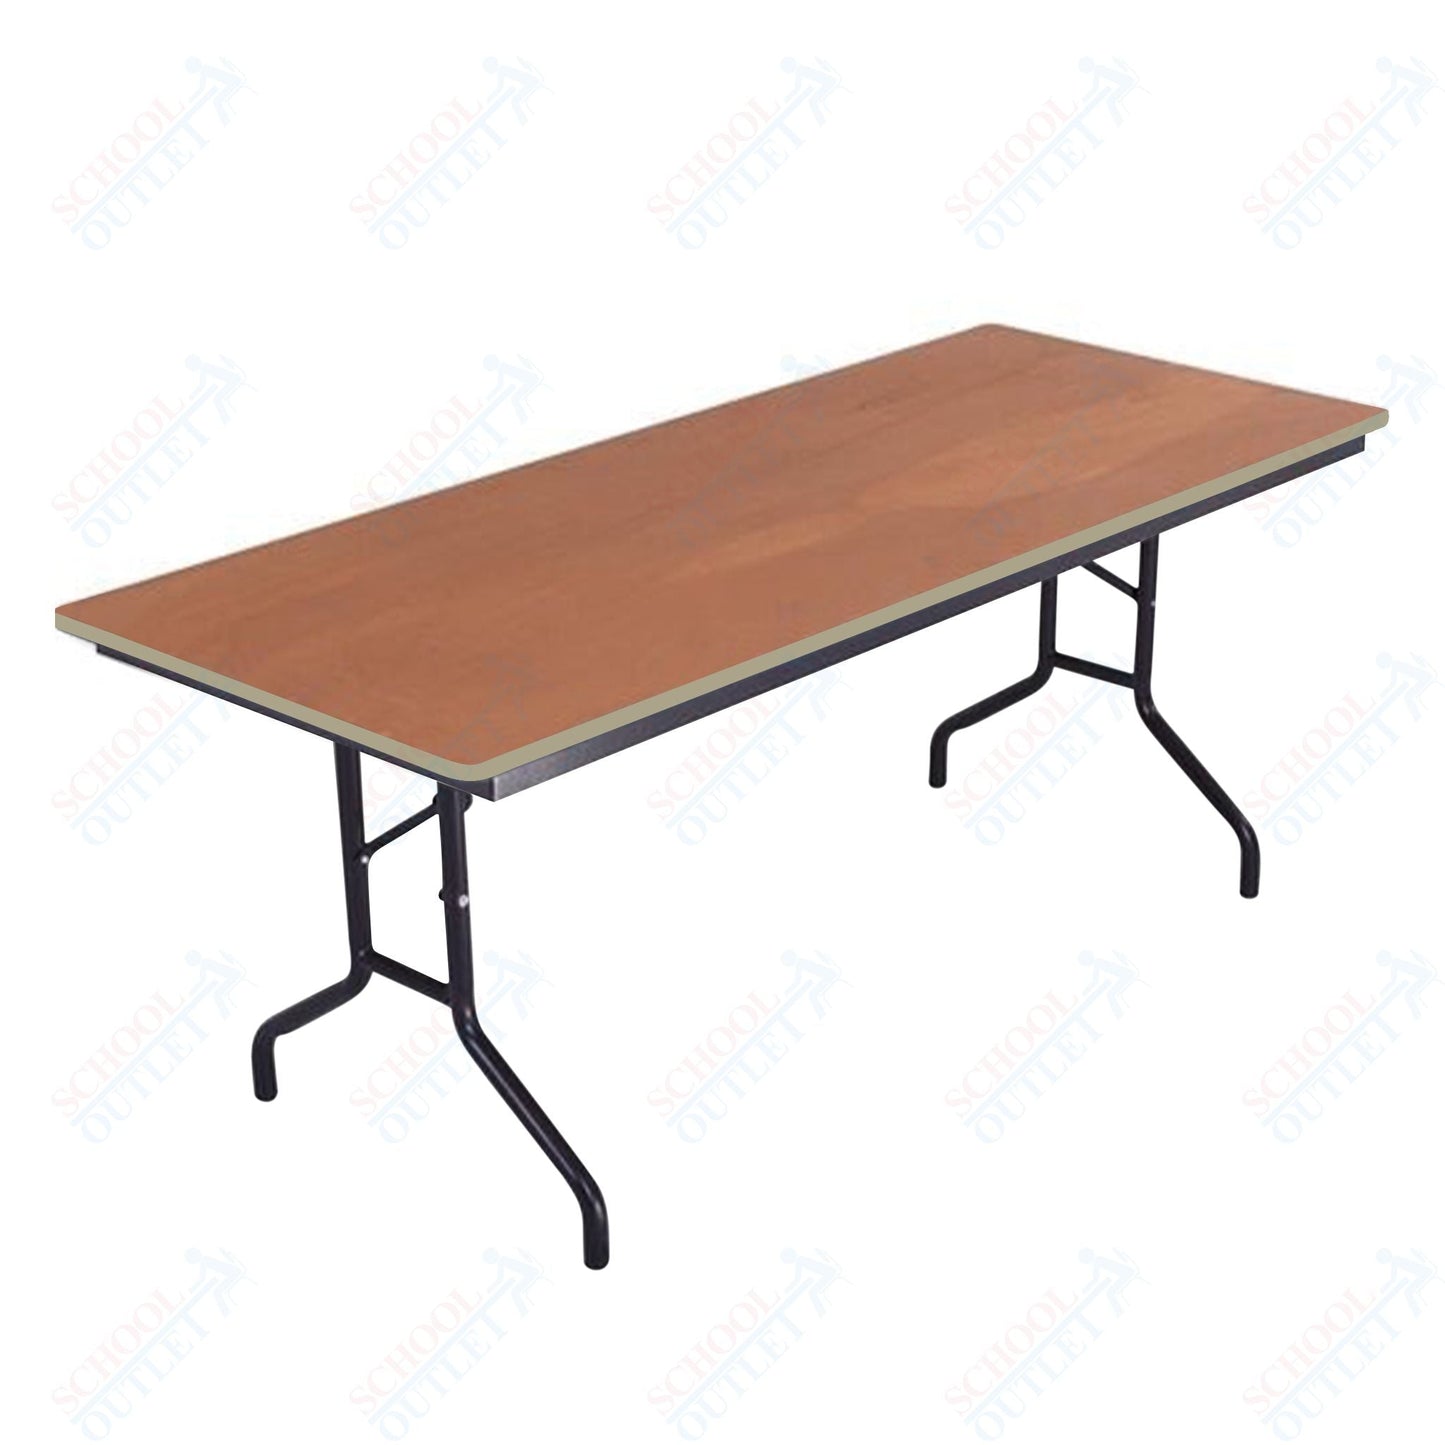 AmTab Folding Table - Plywood Stained and Sealed - Vinyl T - Molding Edge - 36"W x 96"L x 29"H (AmTab AMT - 368PM) - SchoolOutlet